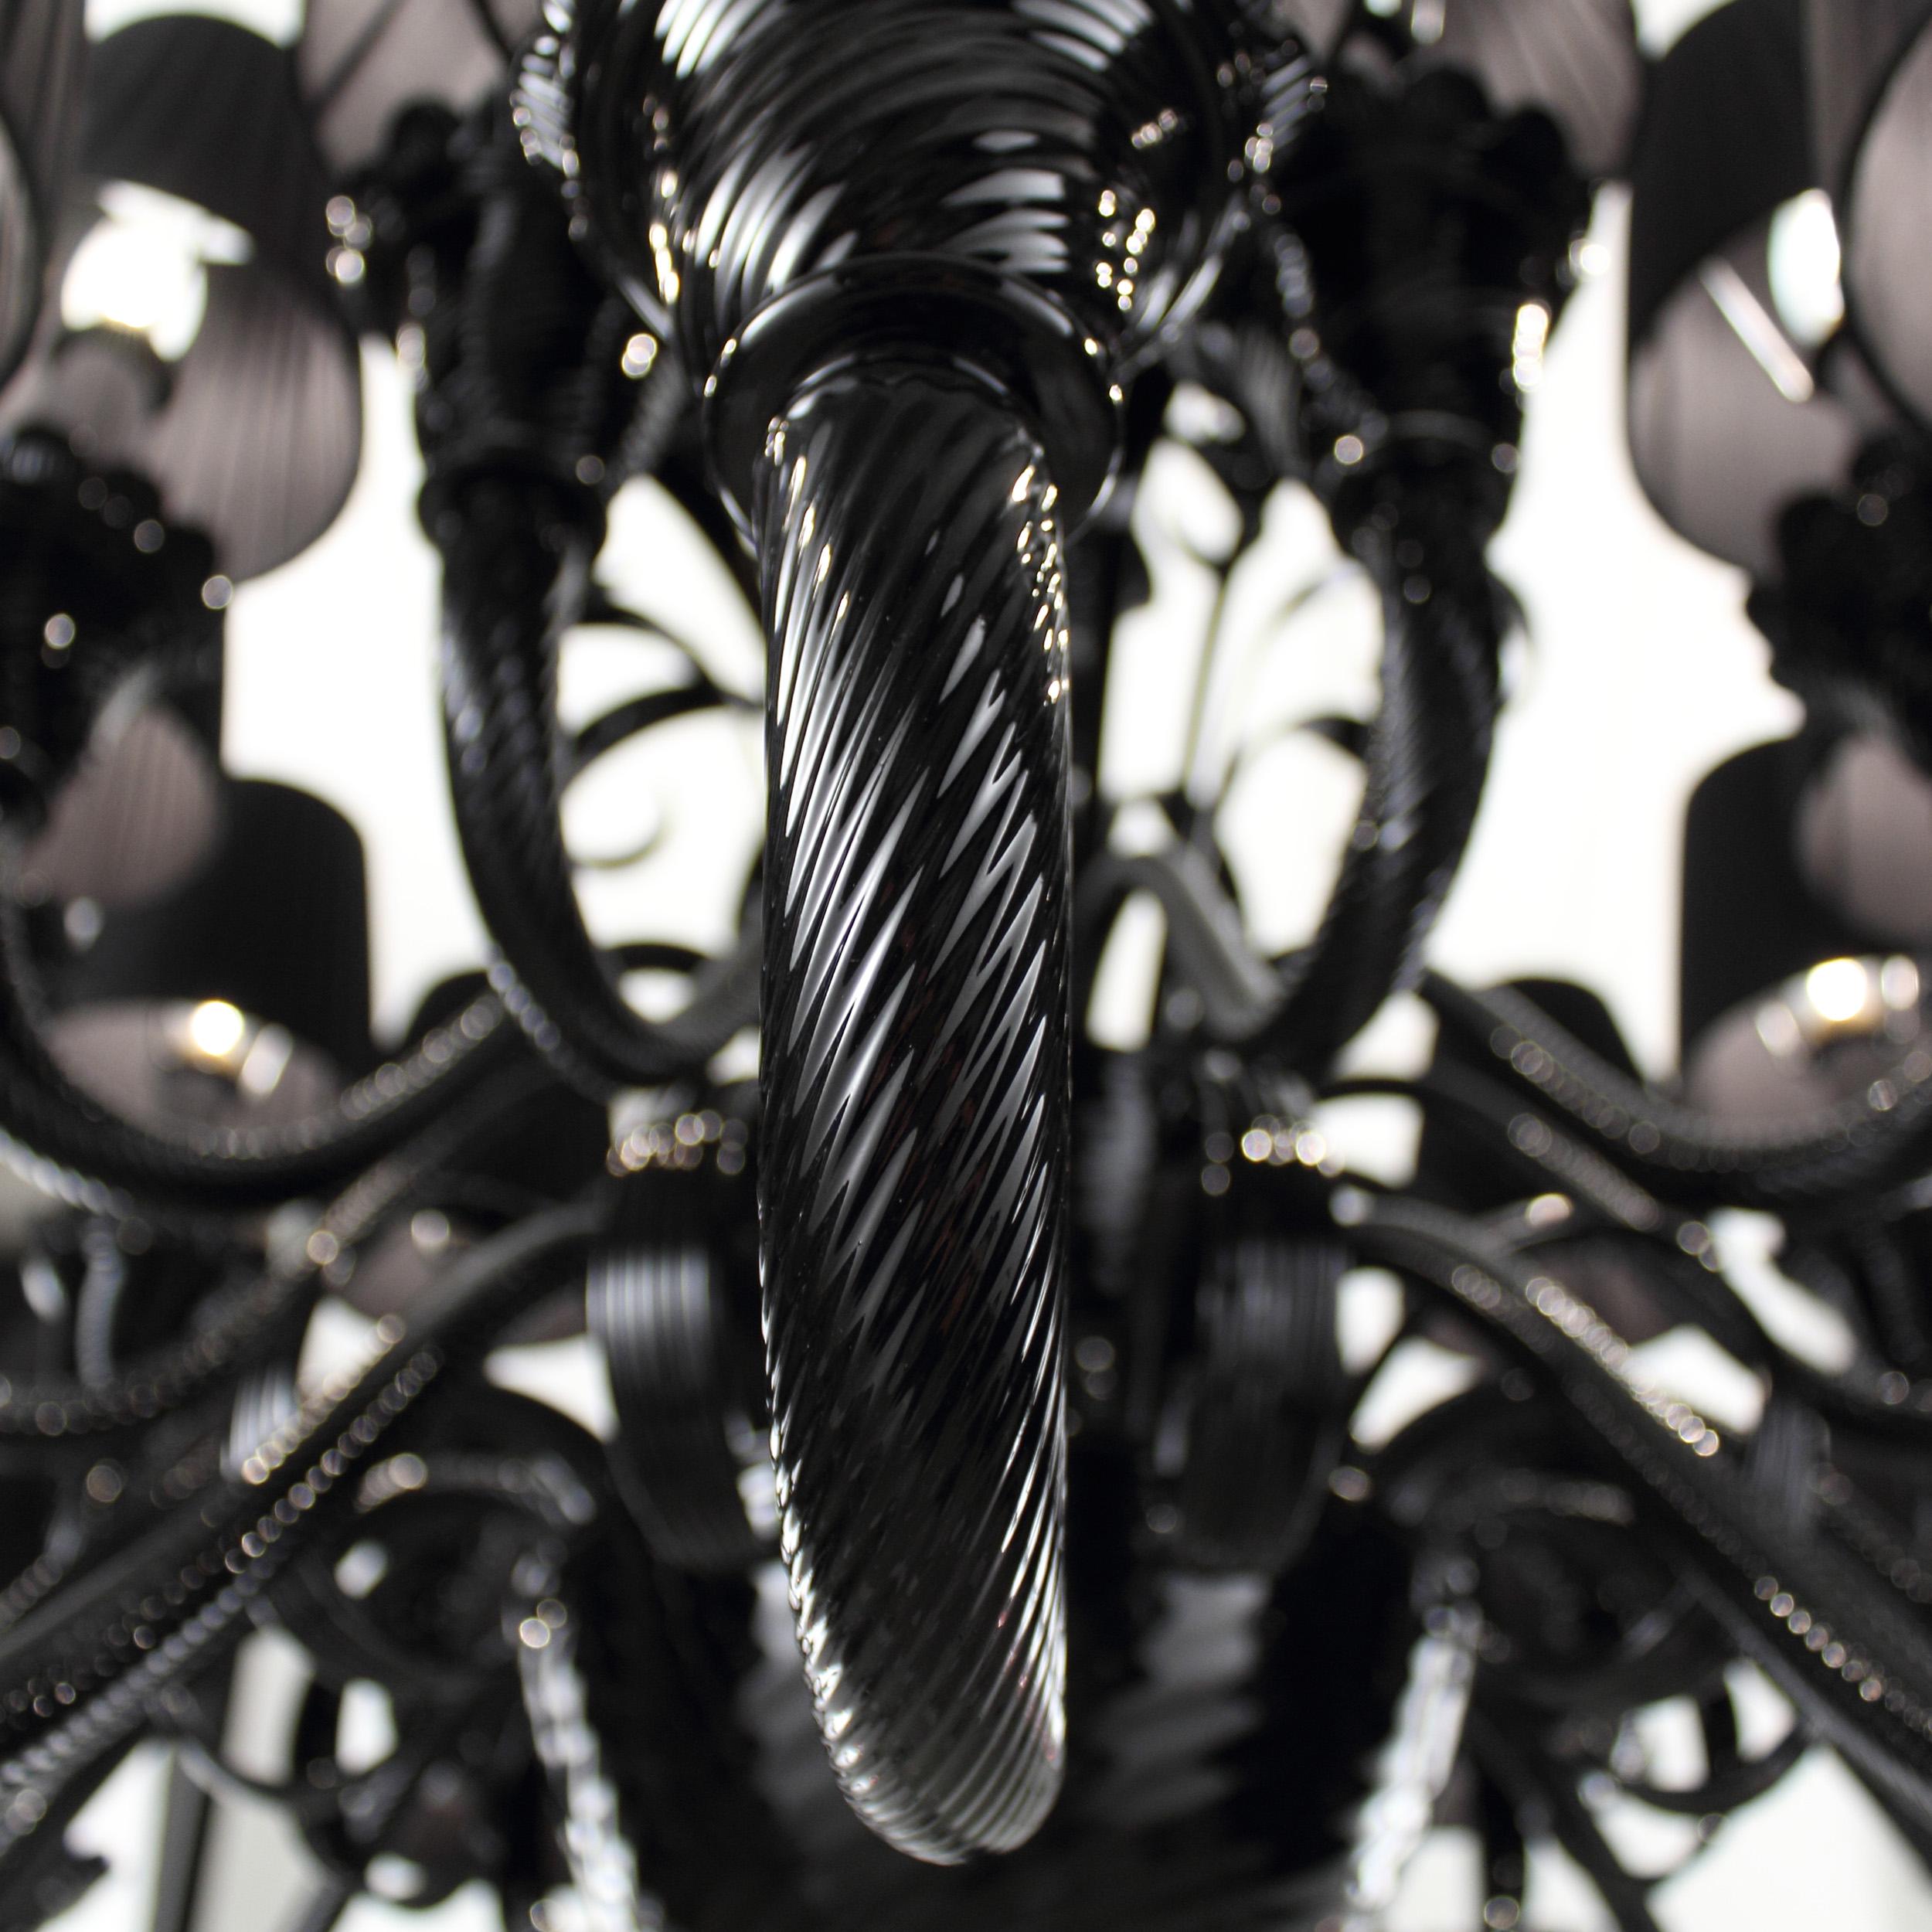 Artistic Chandelier 12+12 Arms Black Murano Glass, Lampshades IKO by Multiforme For Sale 1